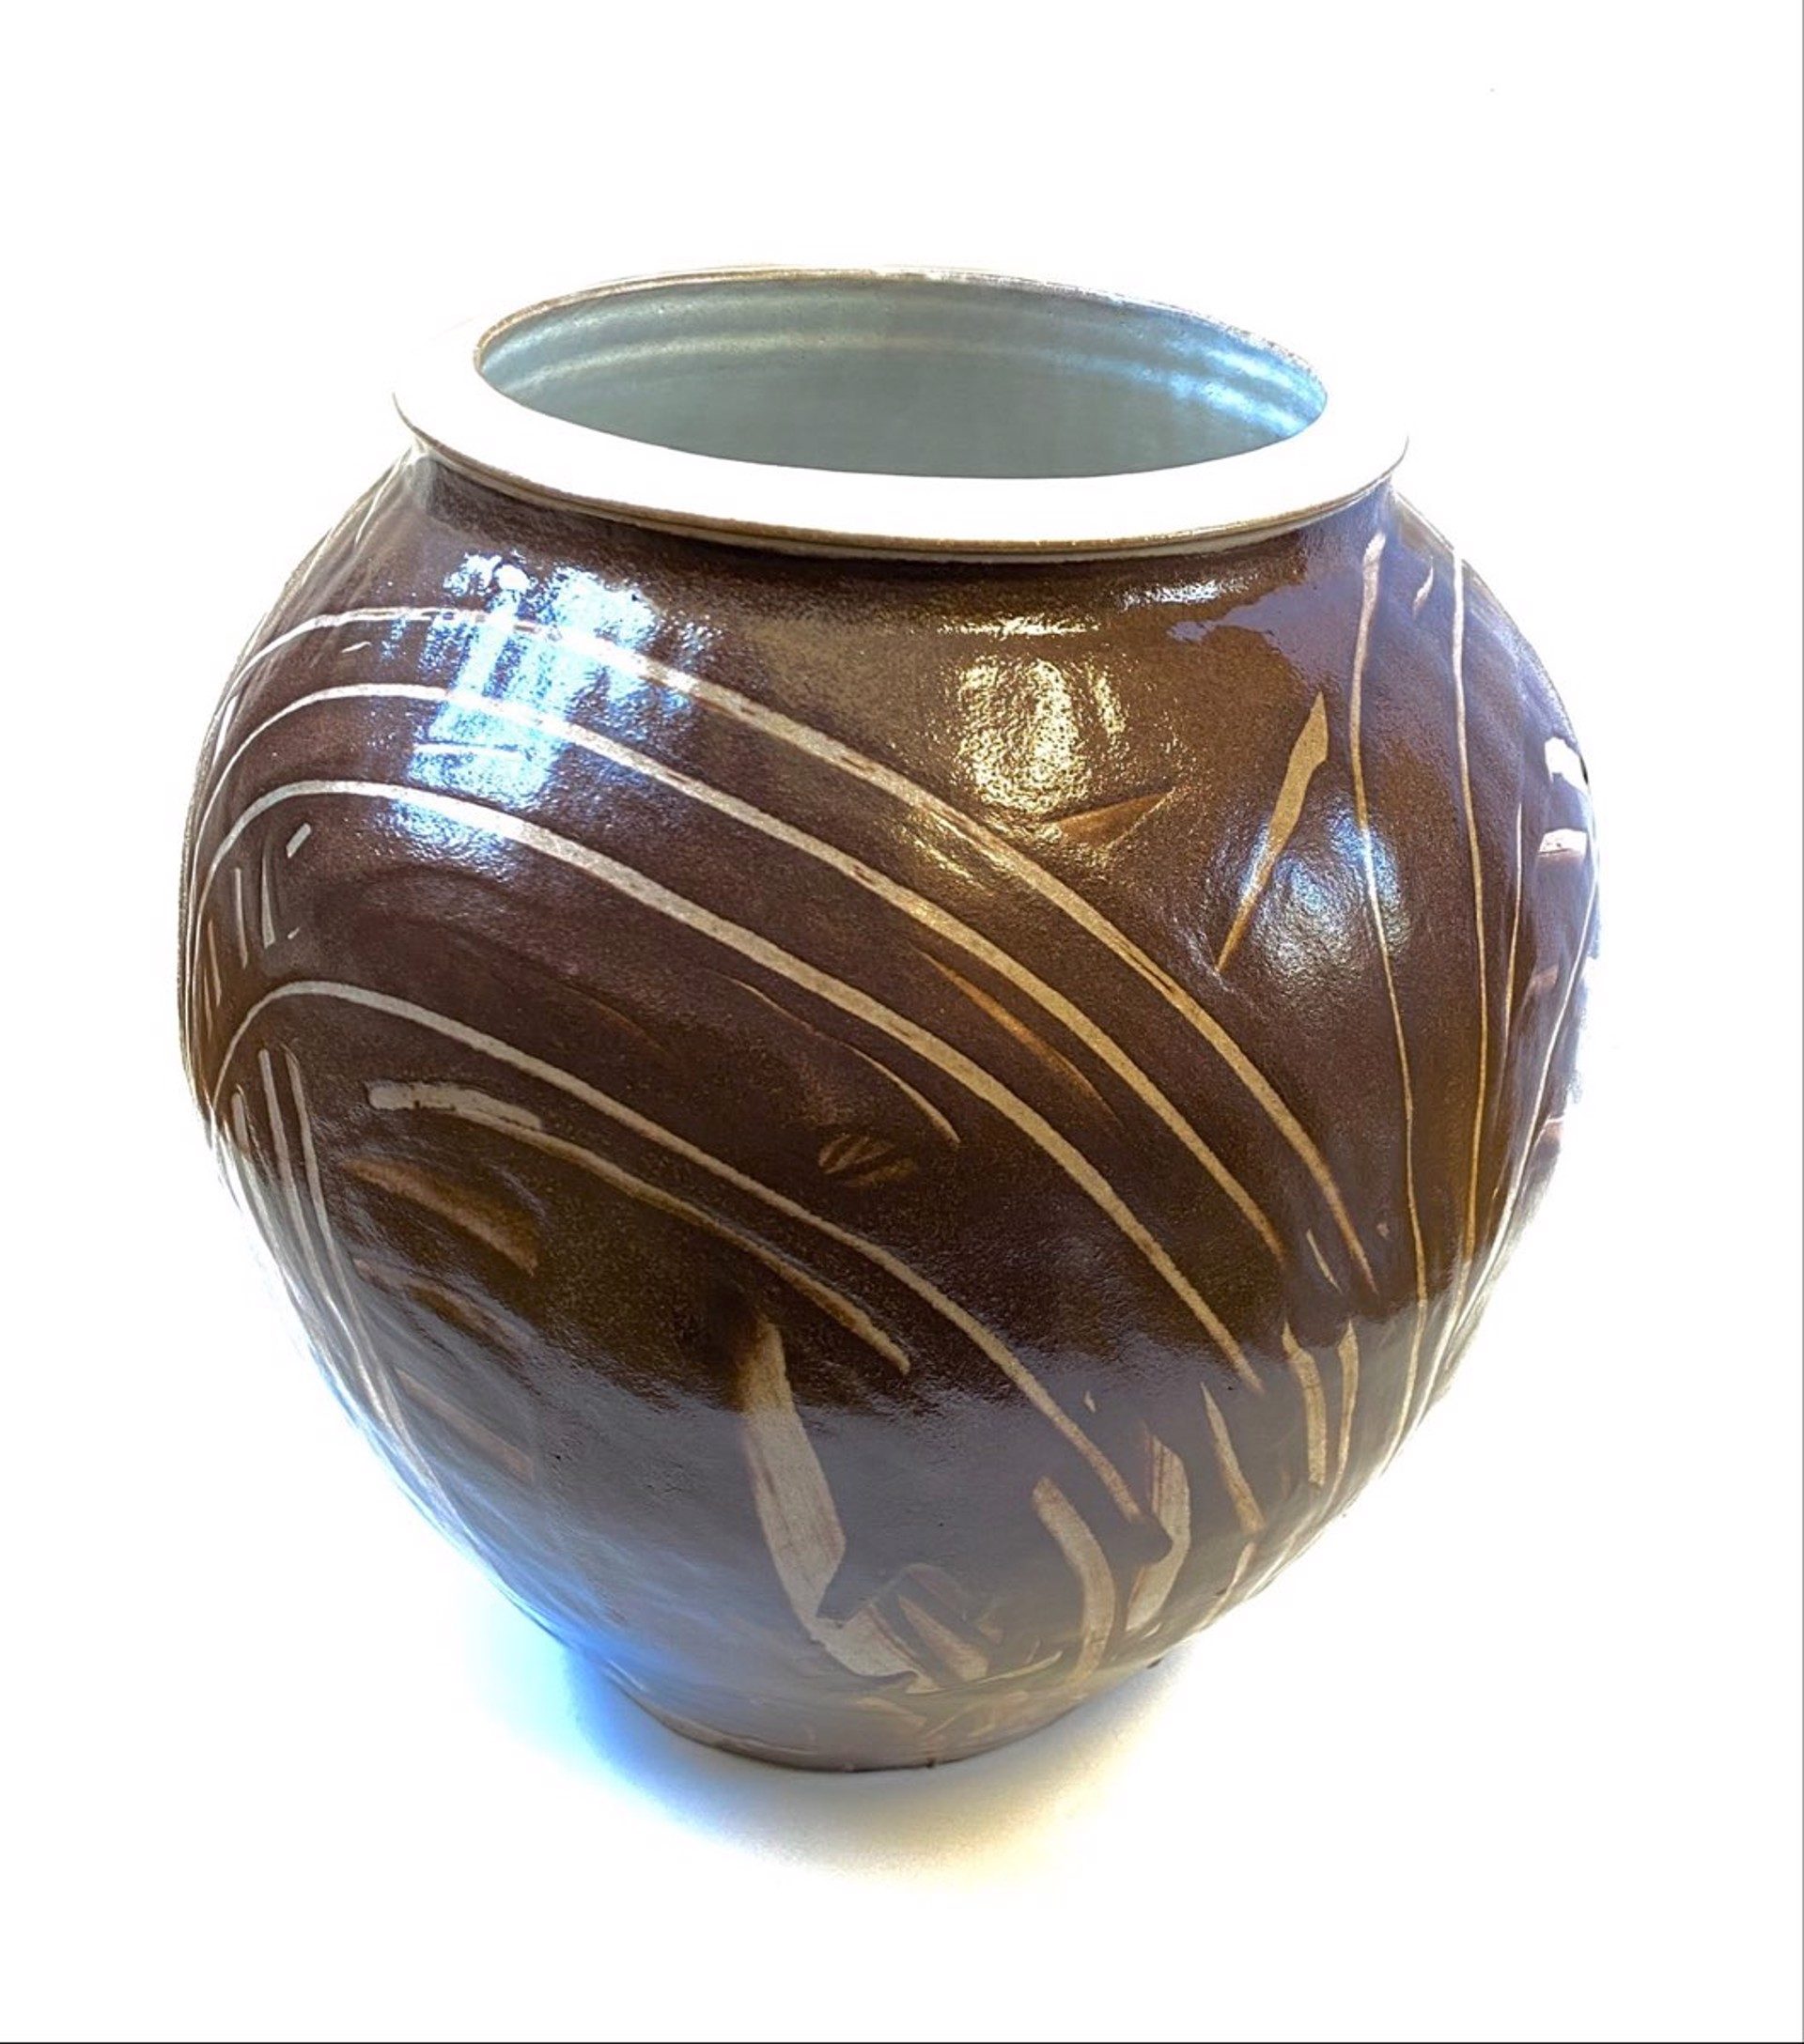 Stoneware Onggi Jar with Laterite Slip by Mitch Yung